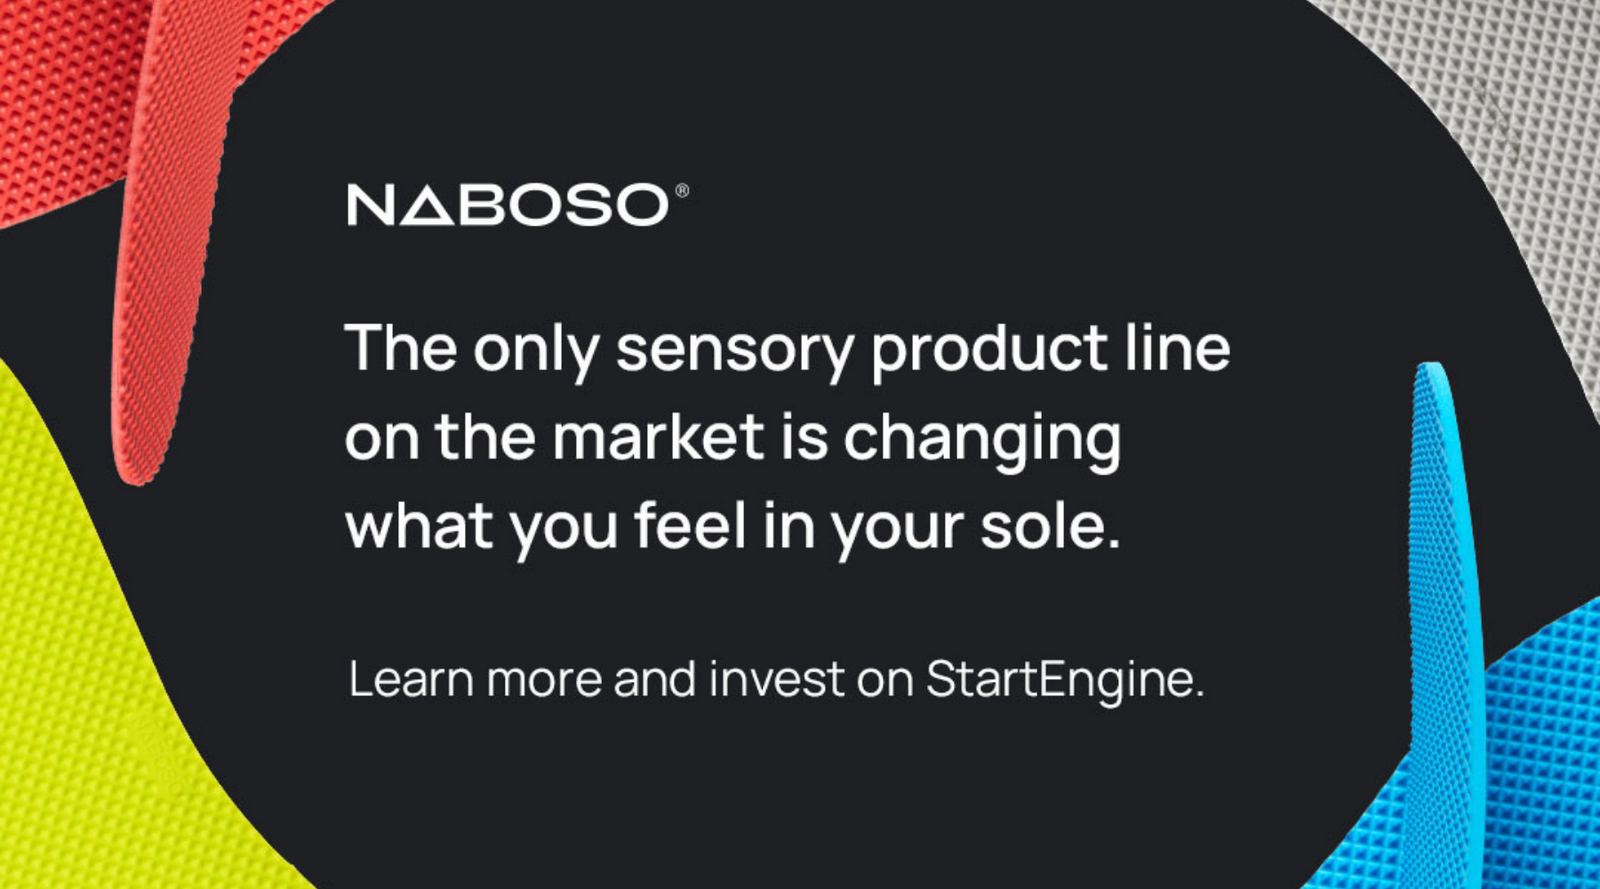 Own a piece of Naboso: The Launch of the Naboso Crowd Equity Raise.